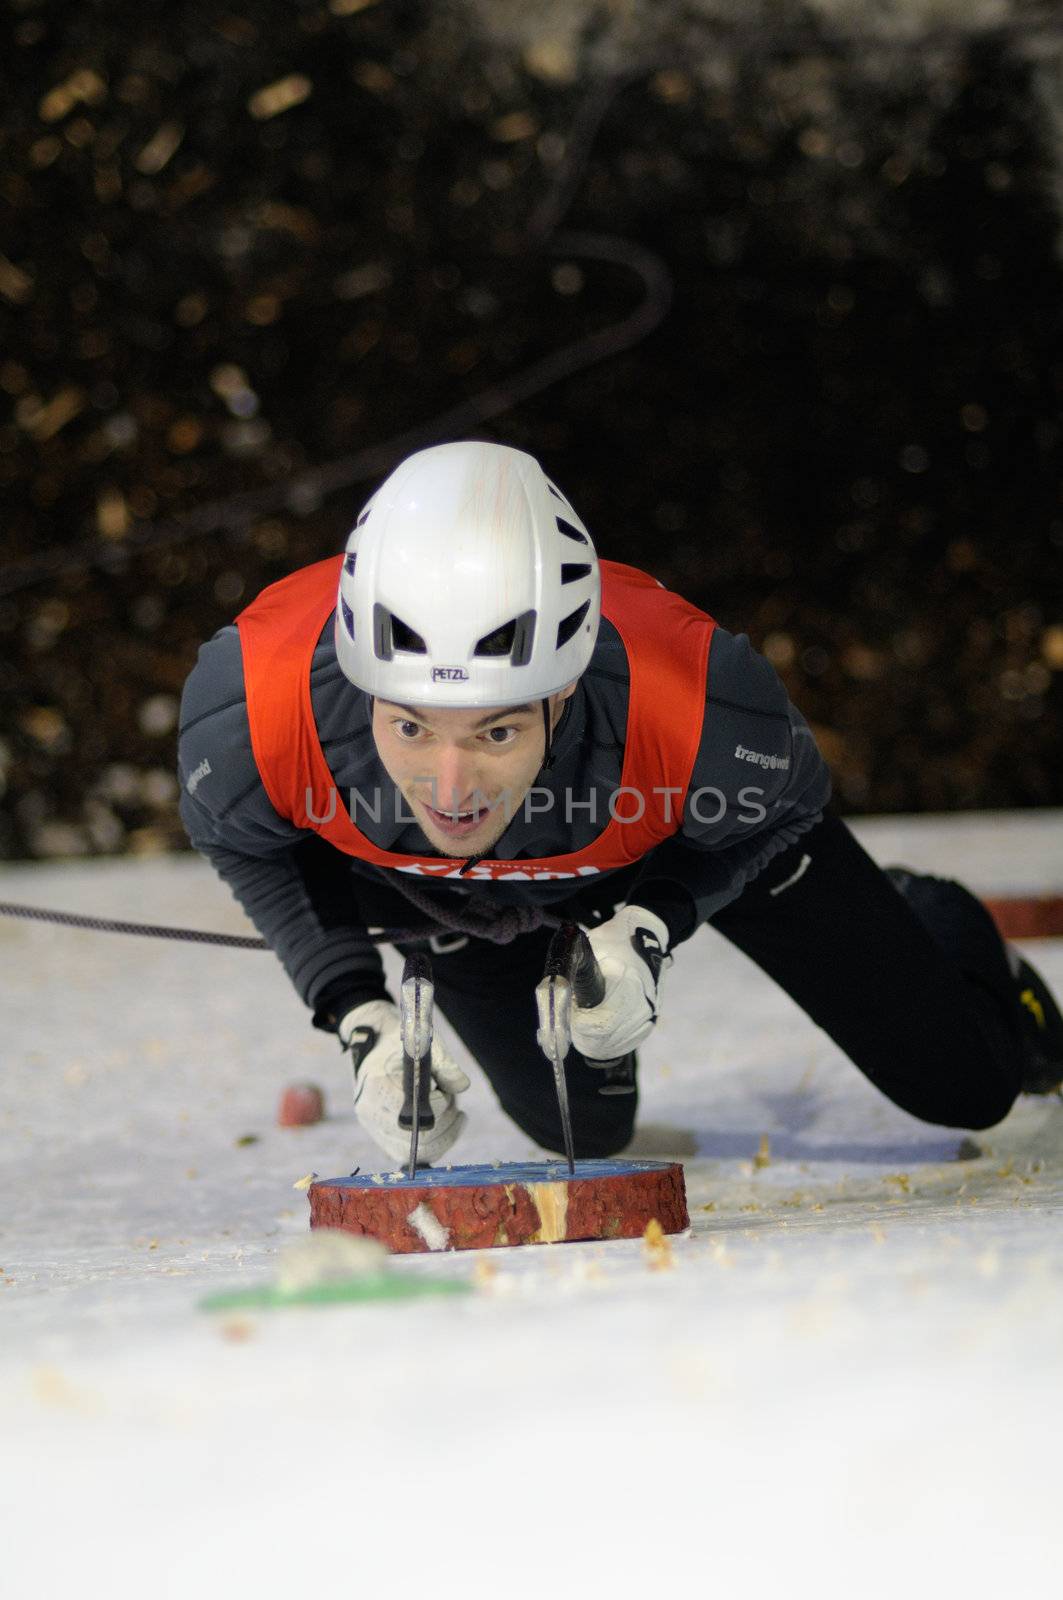 Ice climbing by fahrner